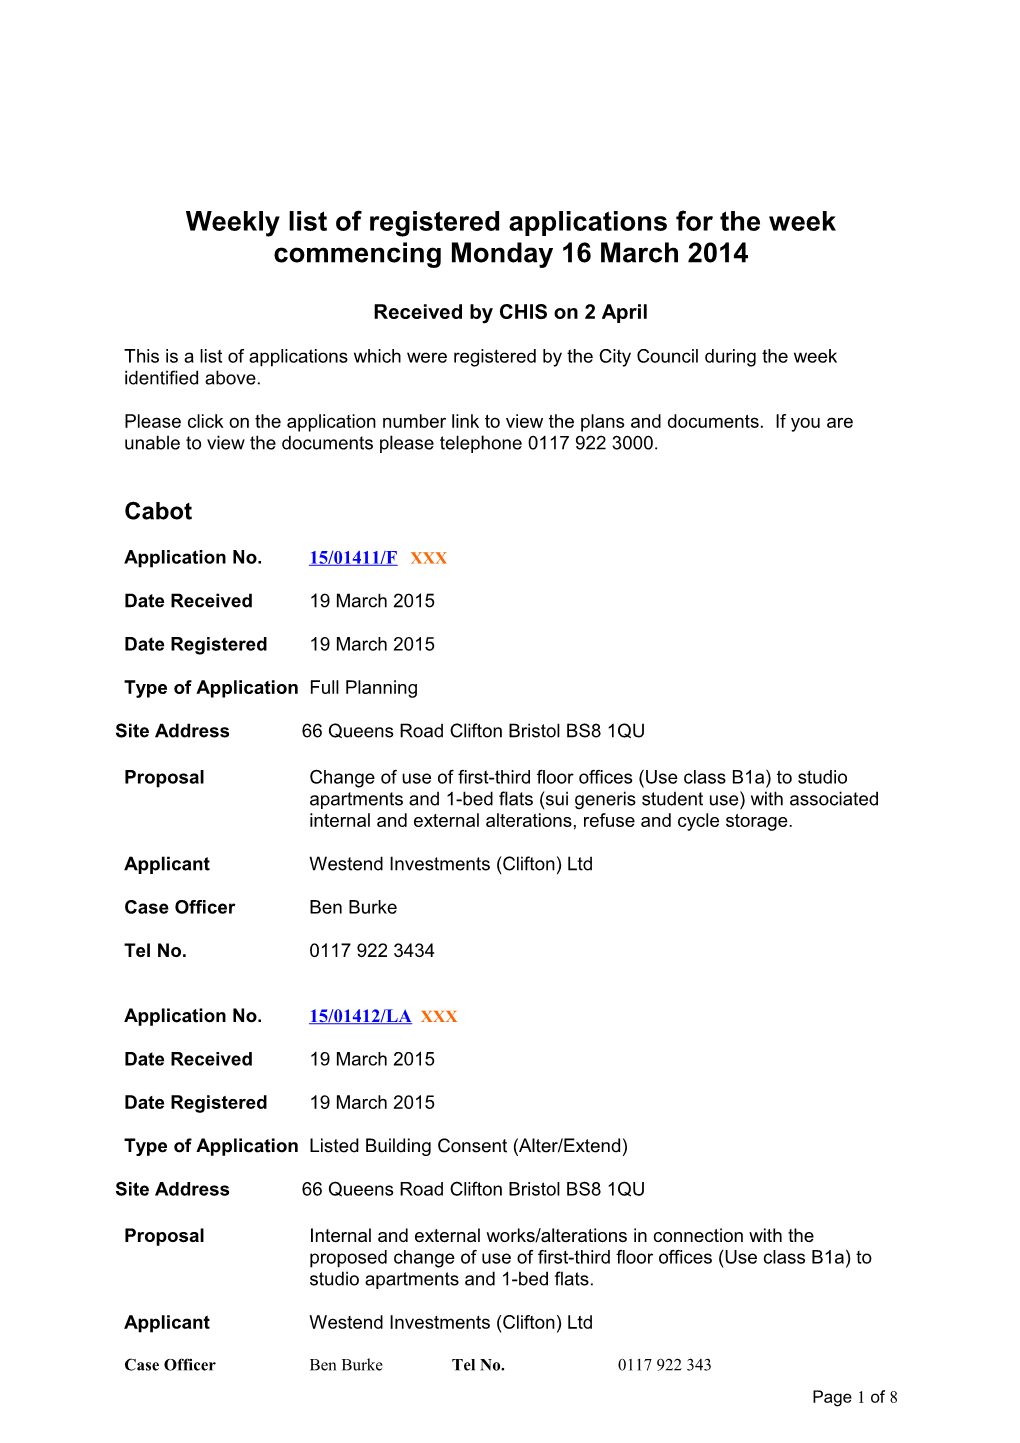 Weekly List of Registered Applications for the Week Commencing Monday 16 March 2014